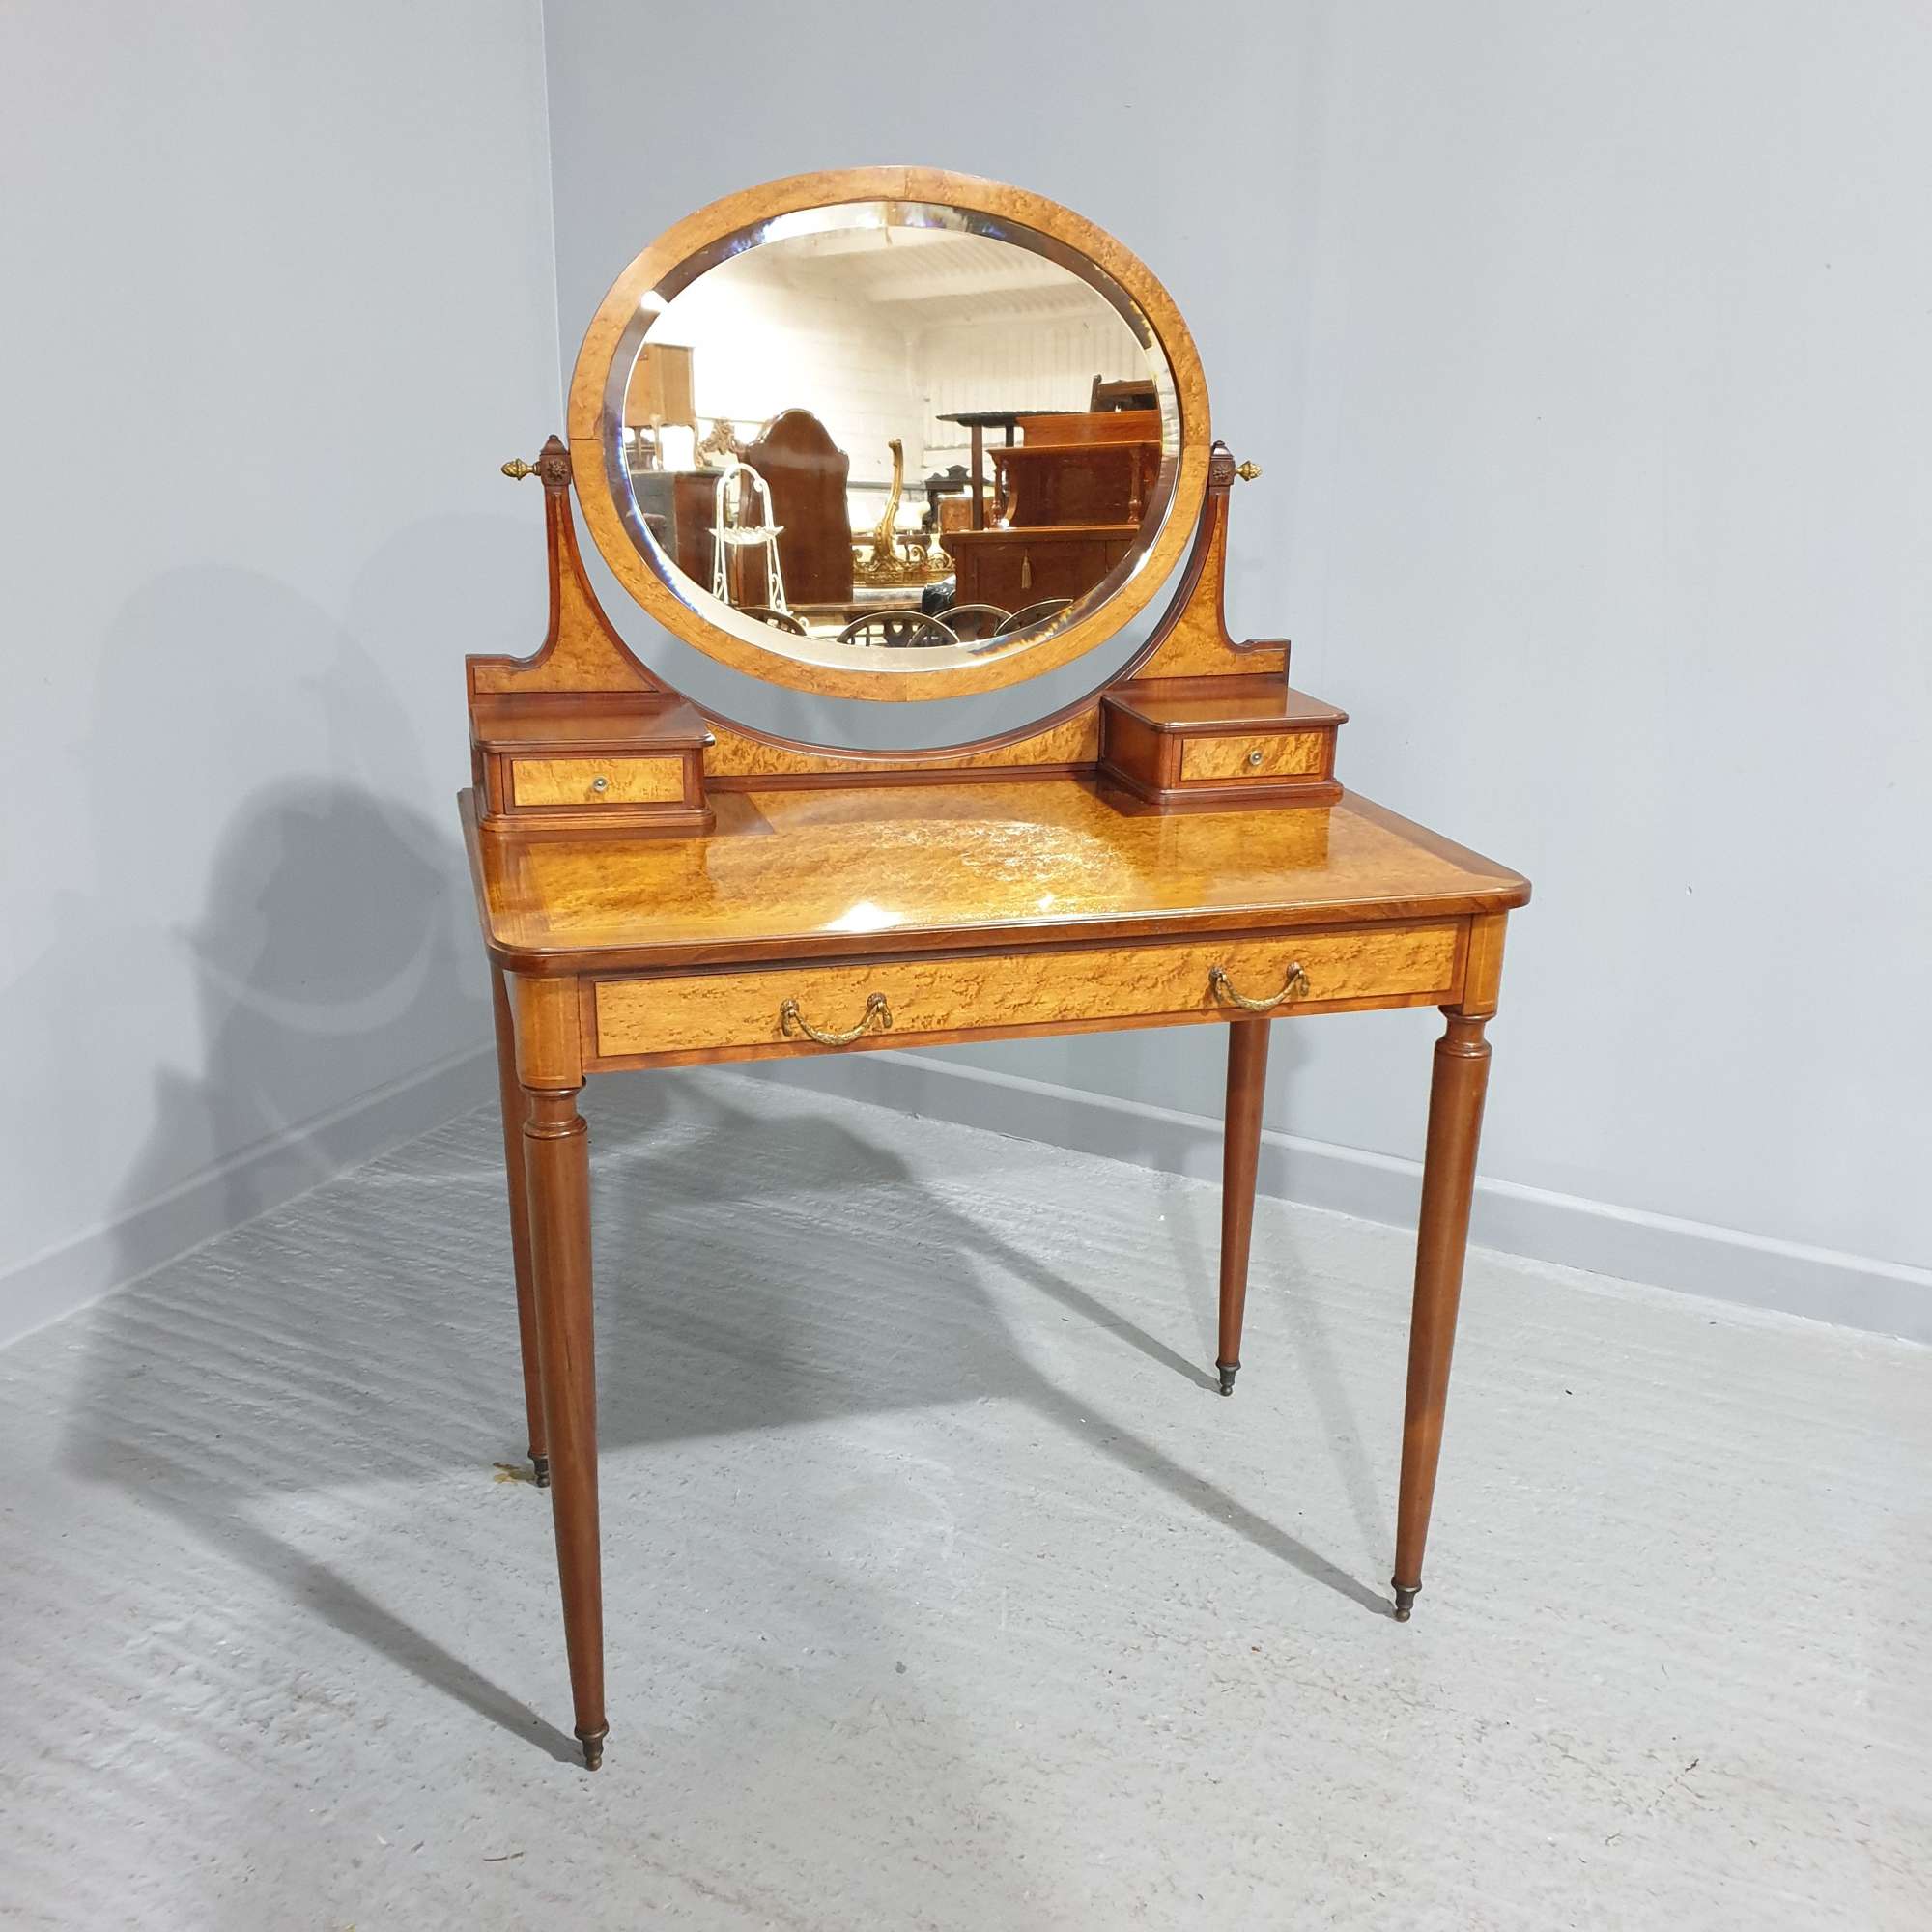 Lovey French Burr Walnut Antique Dressing Table